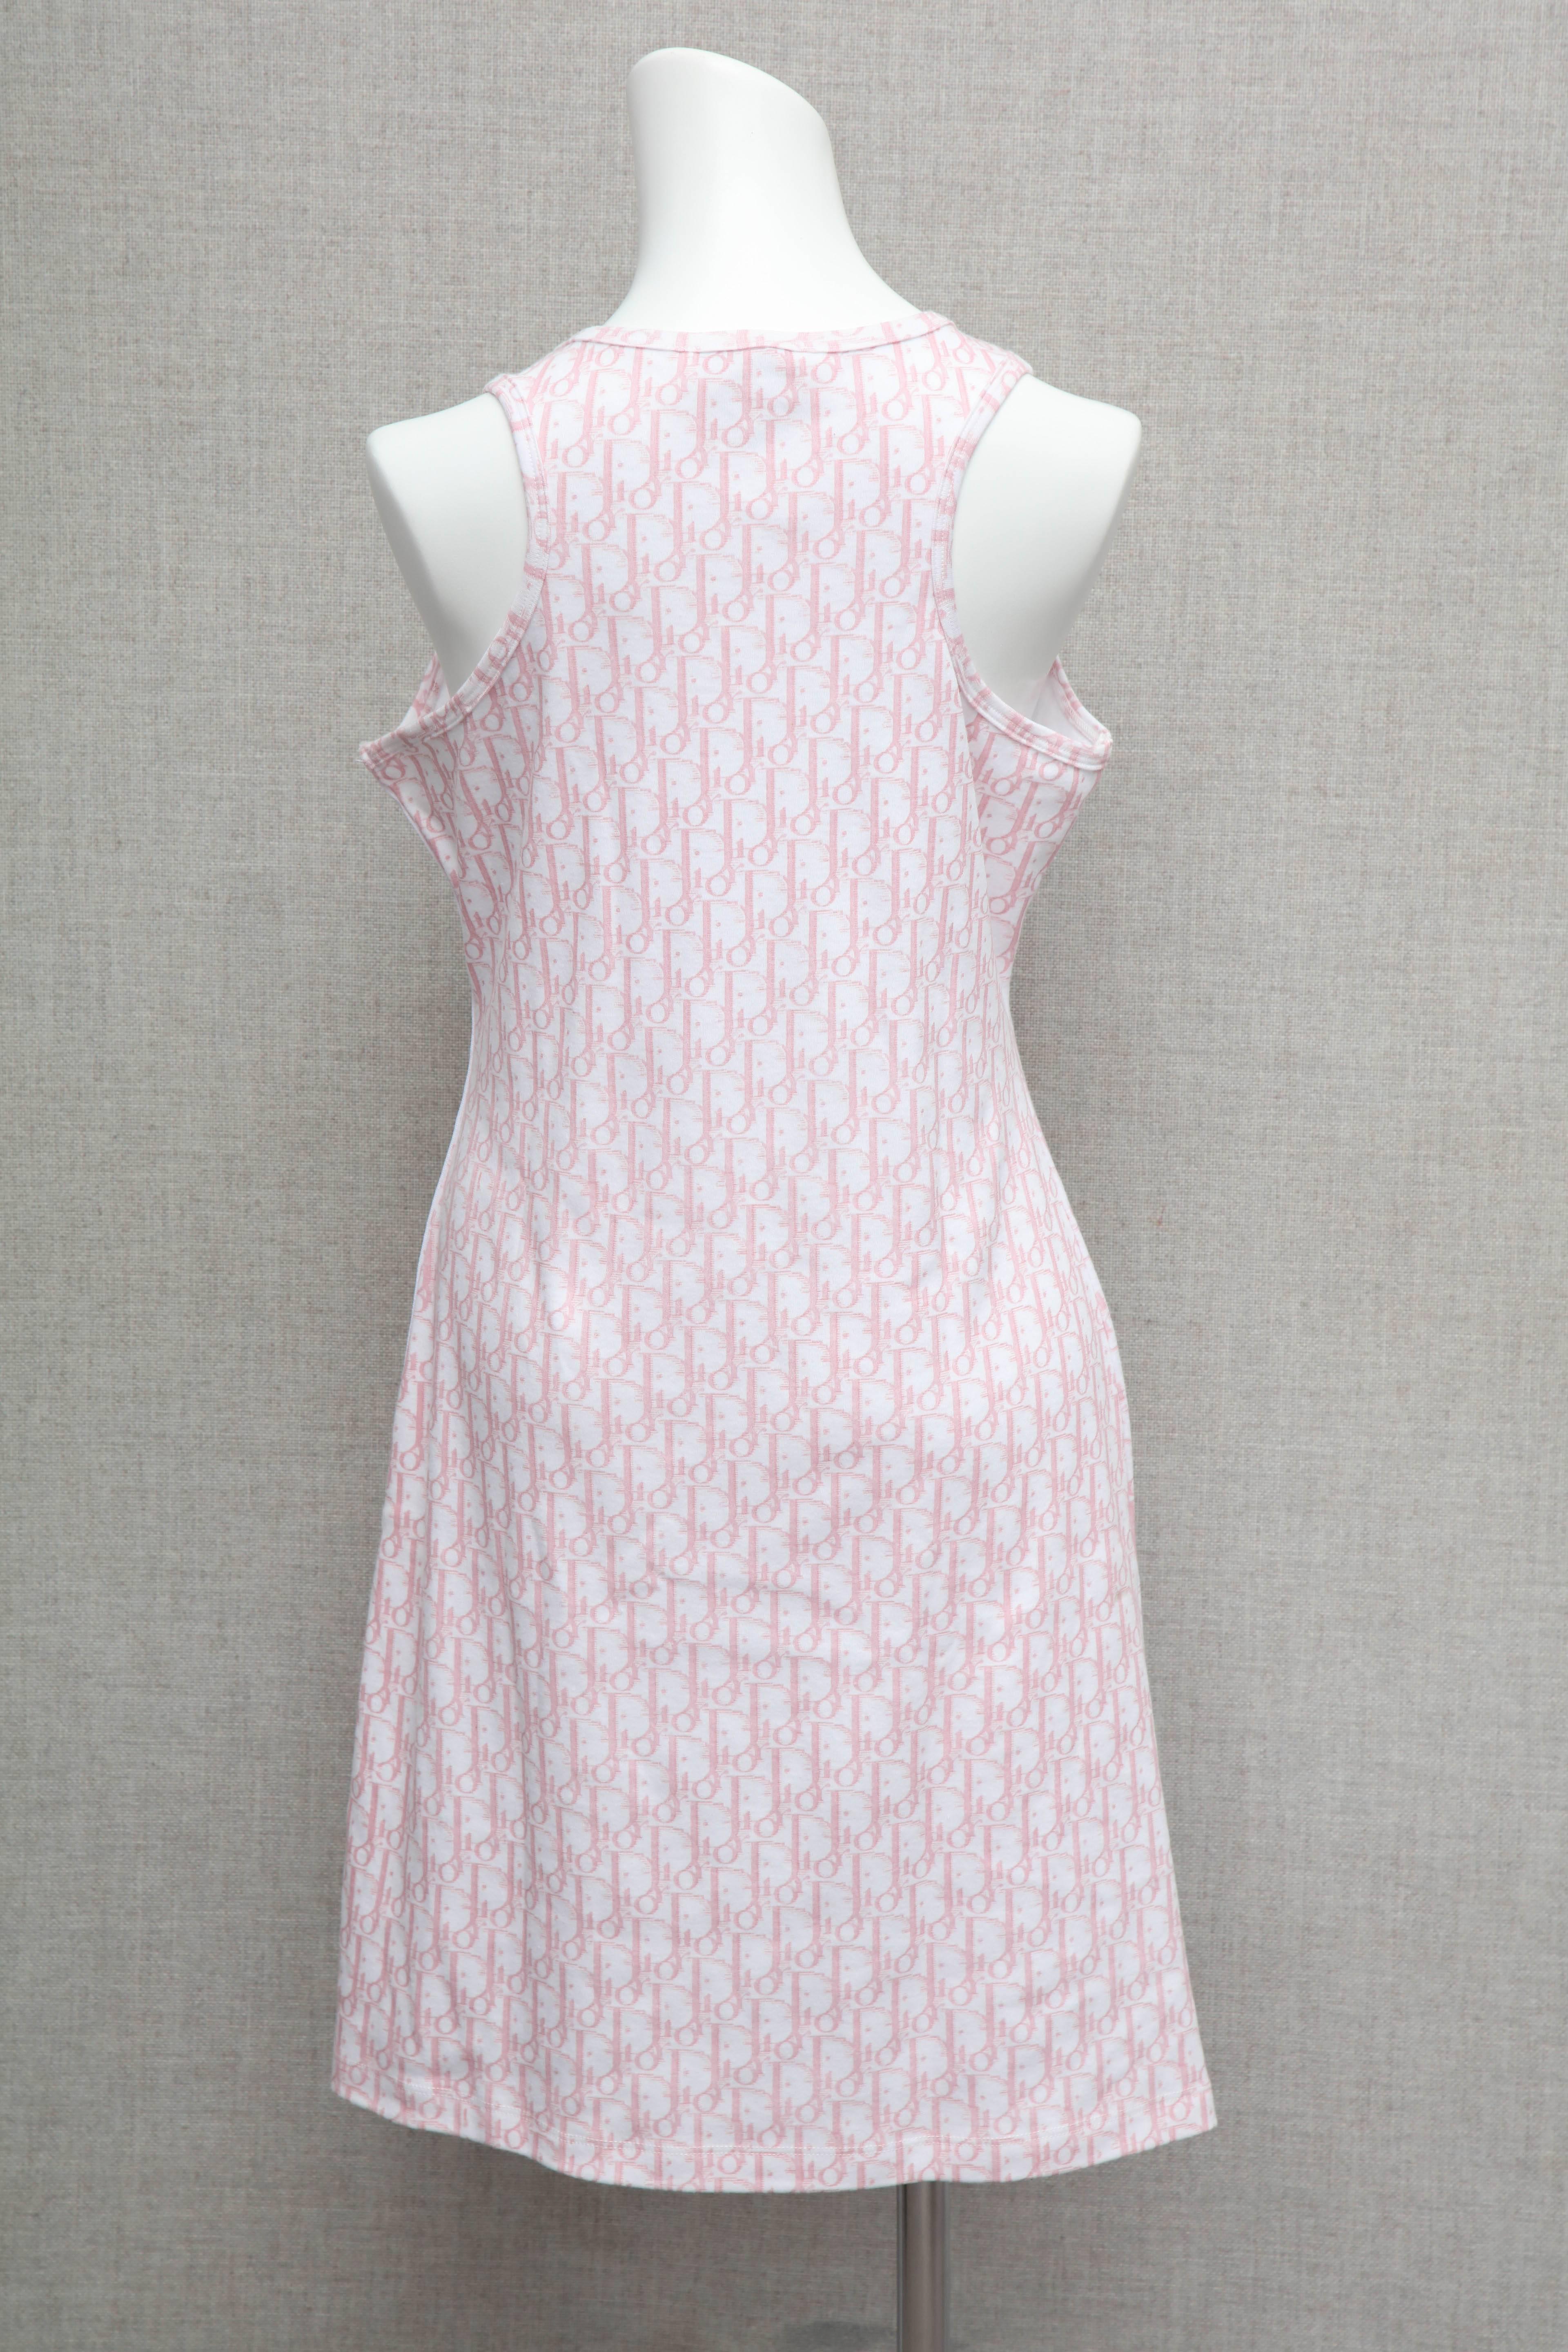 Gray John Galliano for Christian Dior Trotter Logo Pink Dress For Sale